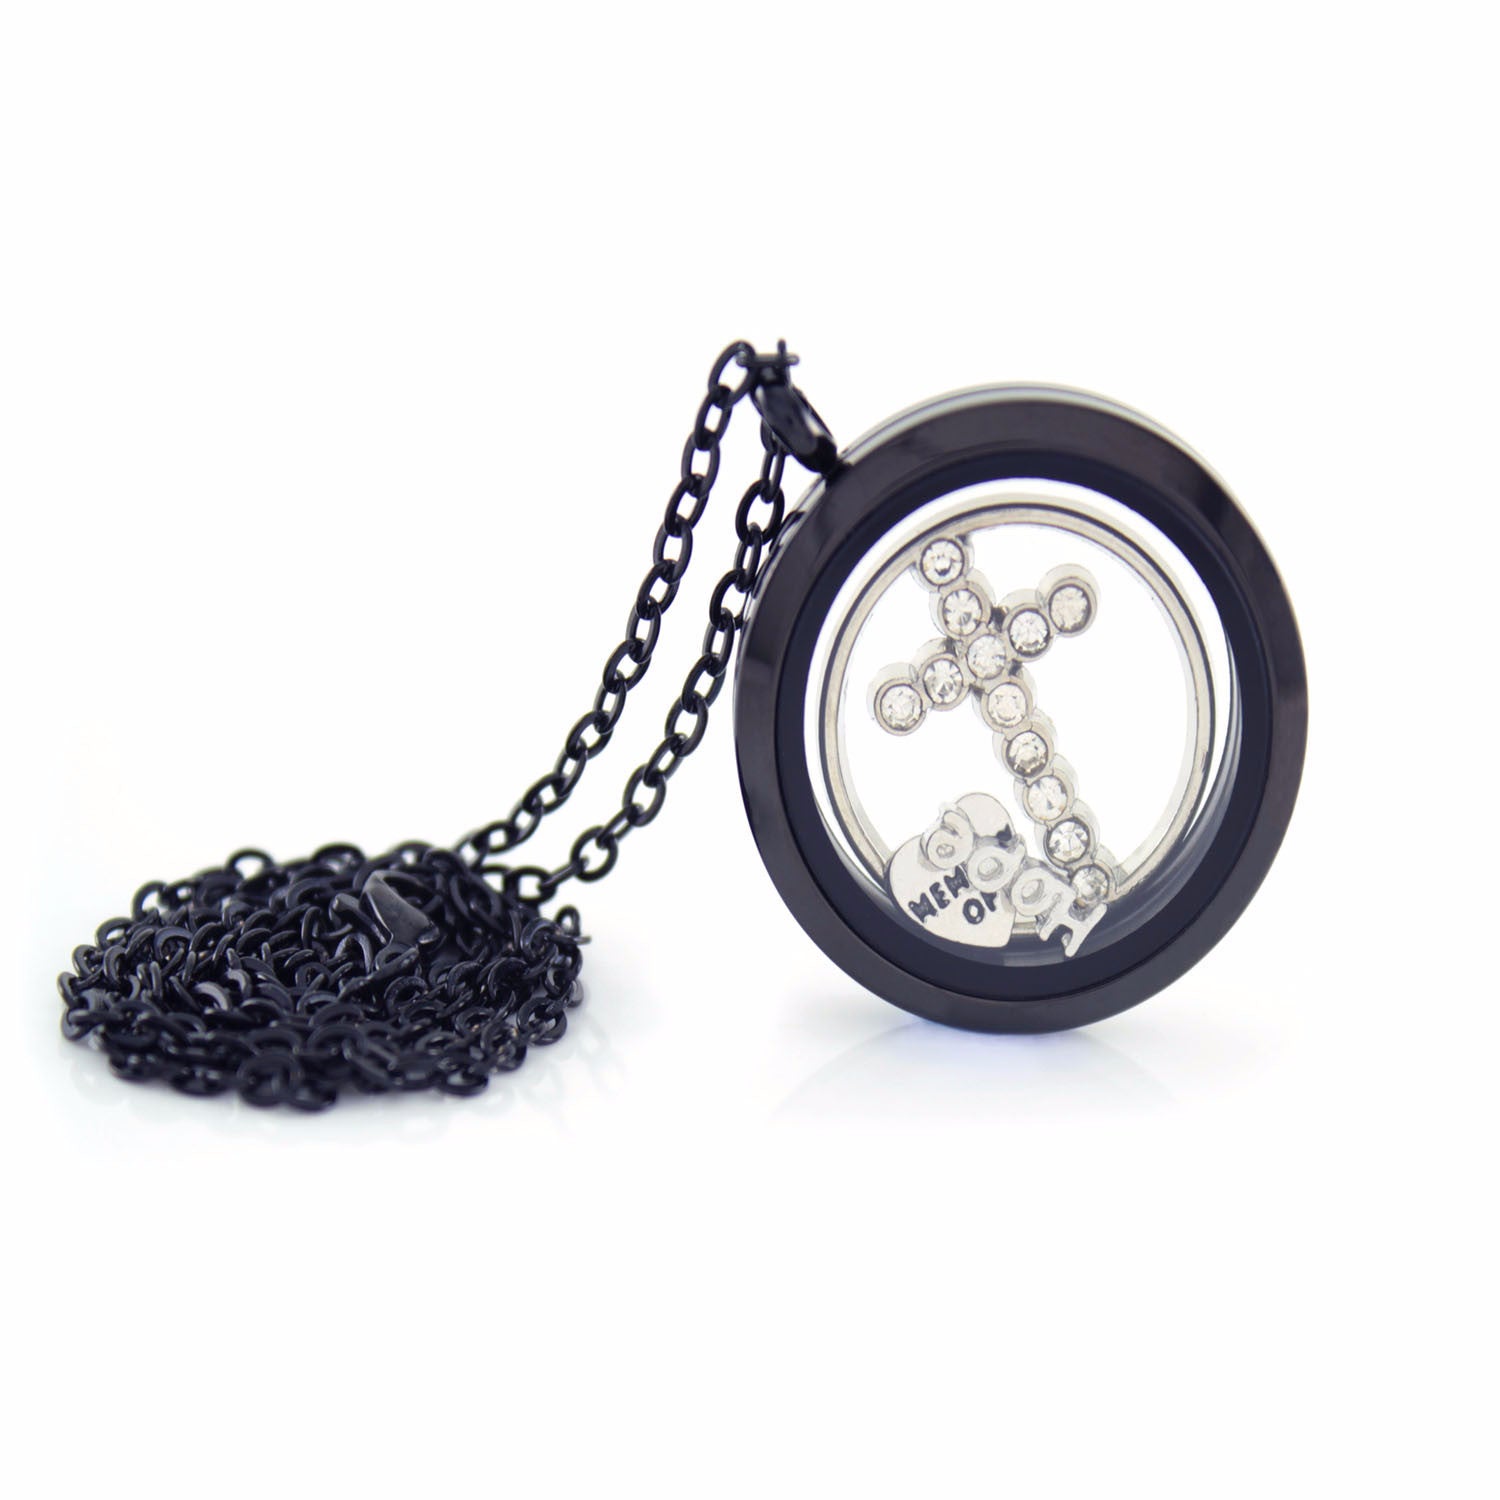 Stainless Steel Floating Locket Necklace with Choice of 6 Charms and 1 Plate (Gunmetal No Stone)